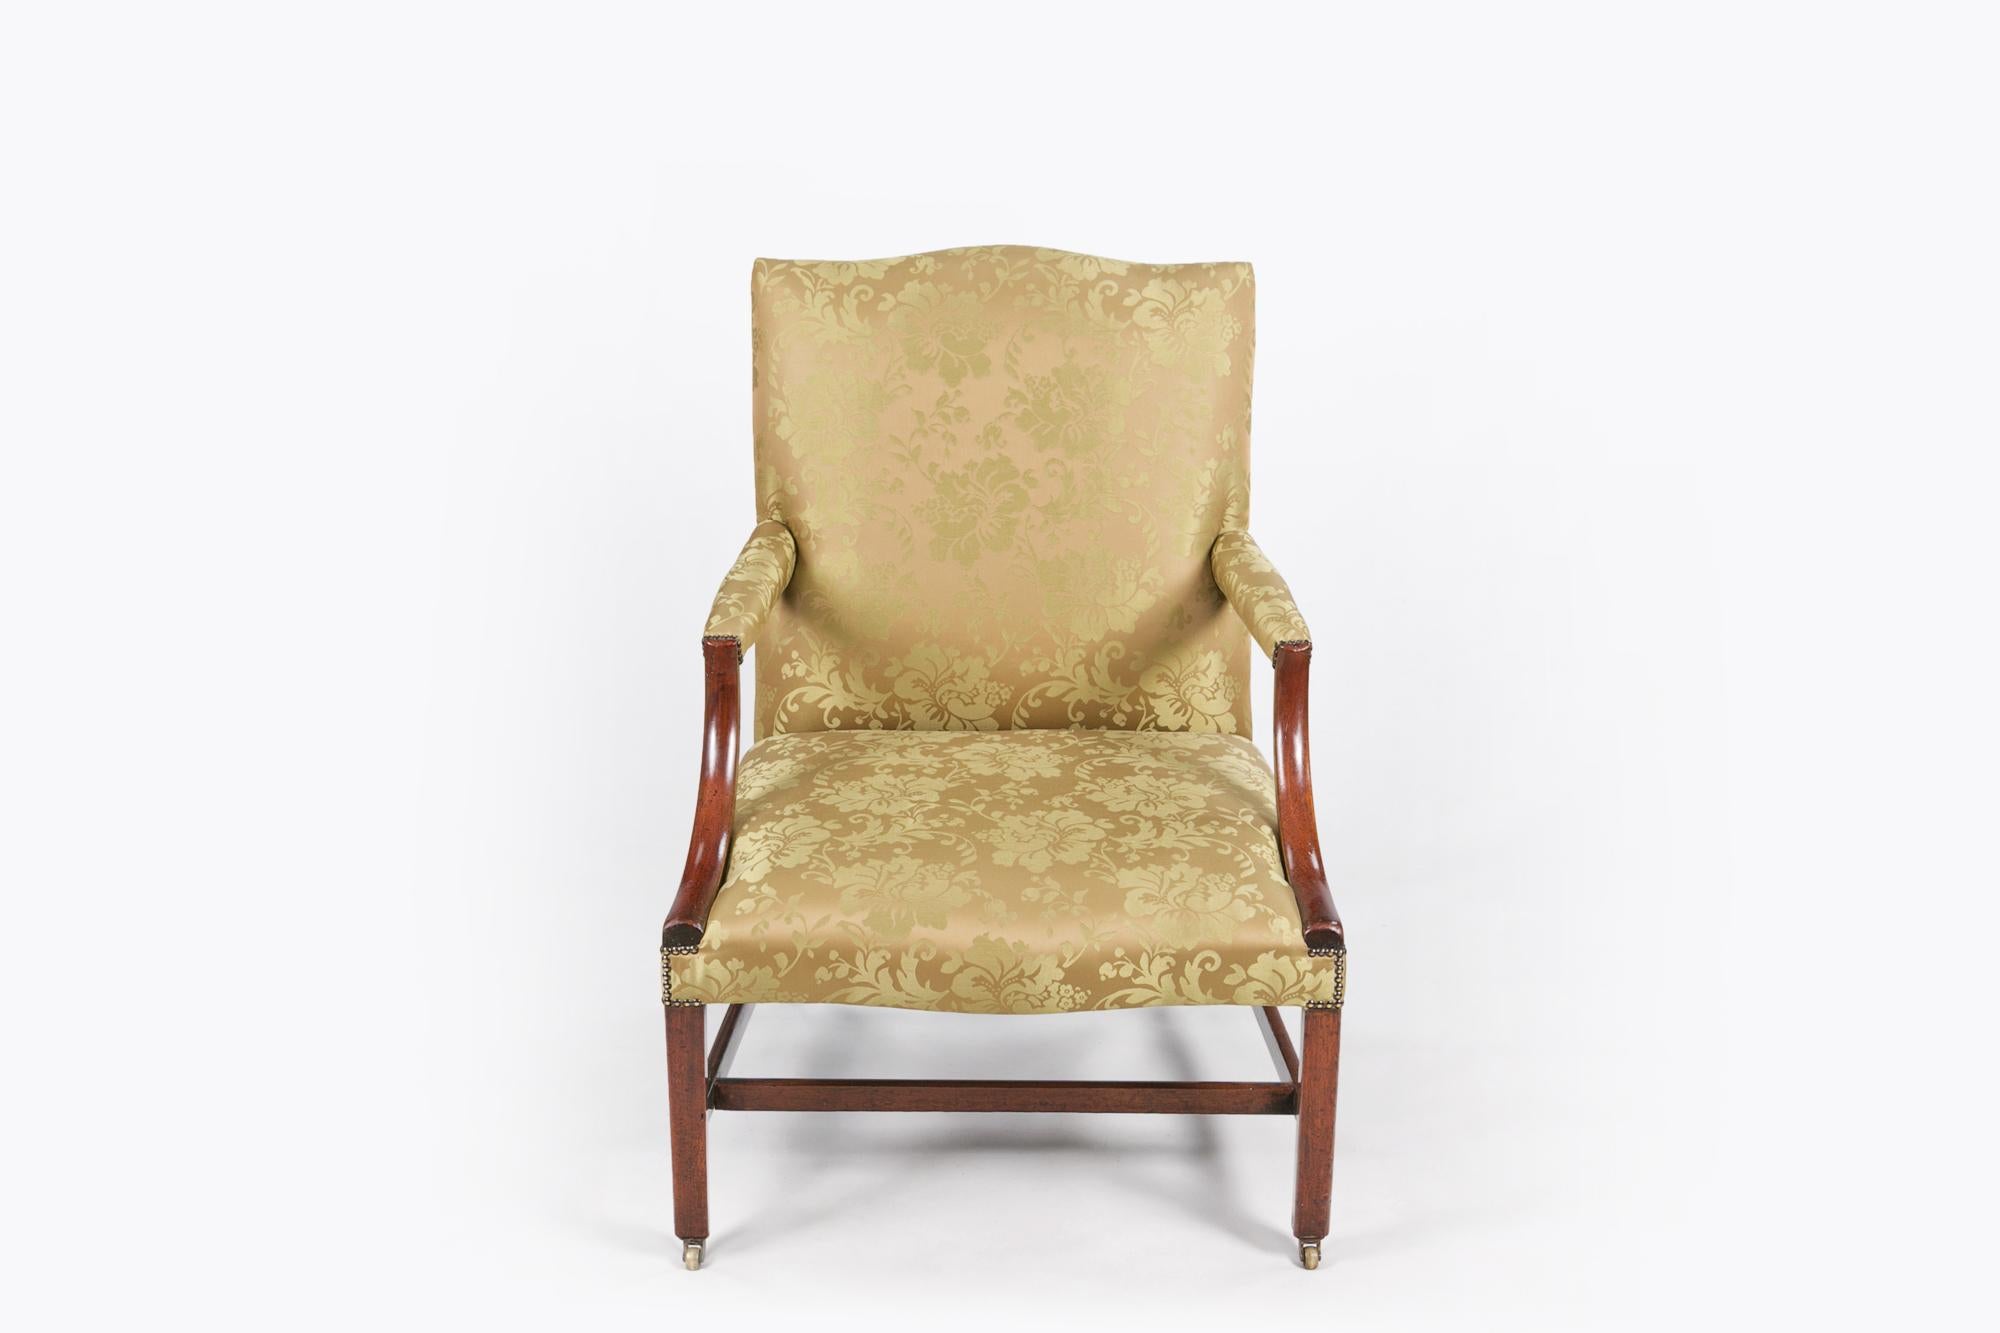 Irish Early 19th Century Gainsborough Armchair after Chippendale For Sale